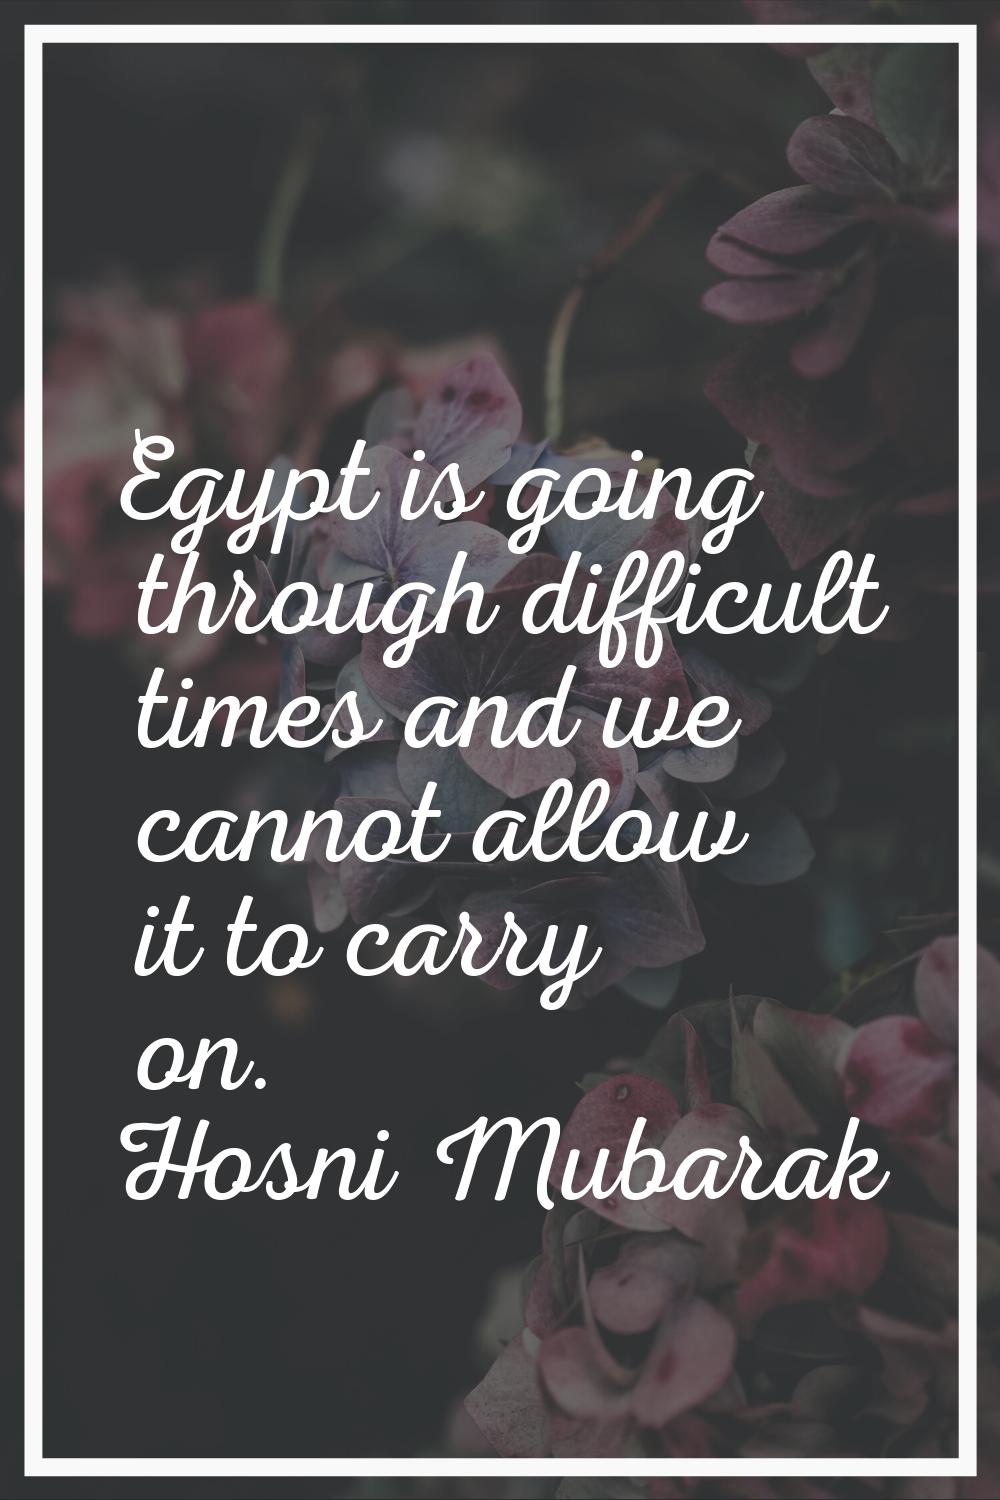 Egypt is going through difficult times and we cannot allow it to carry on.